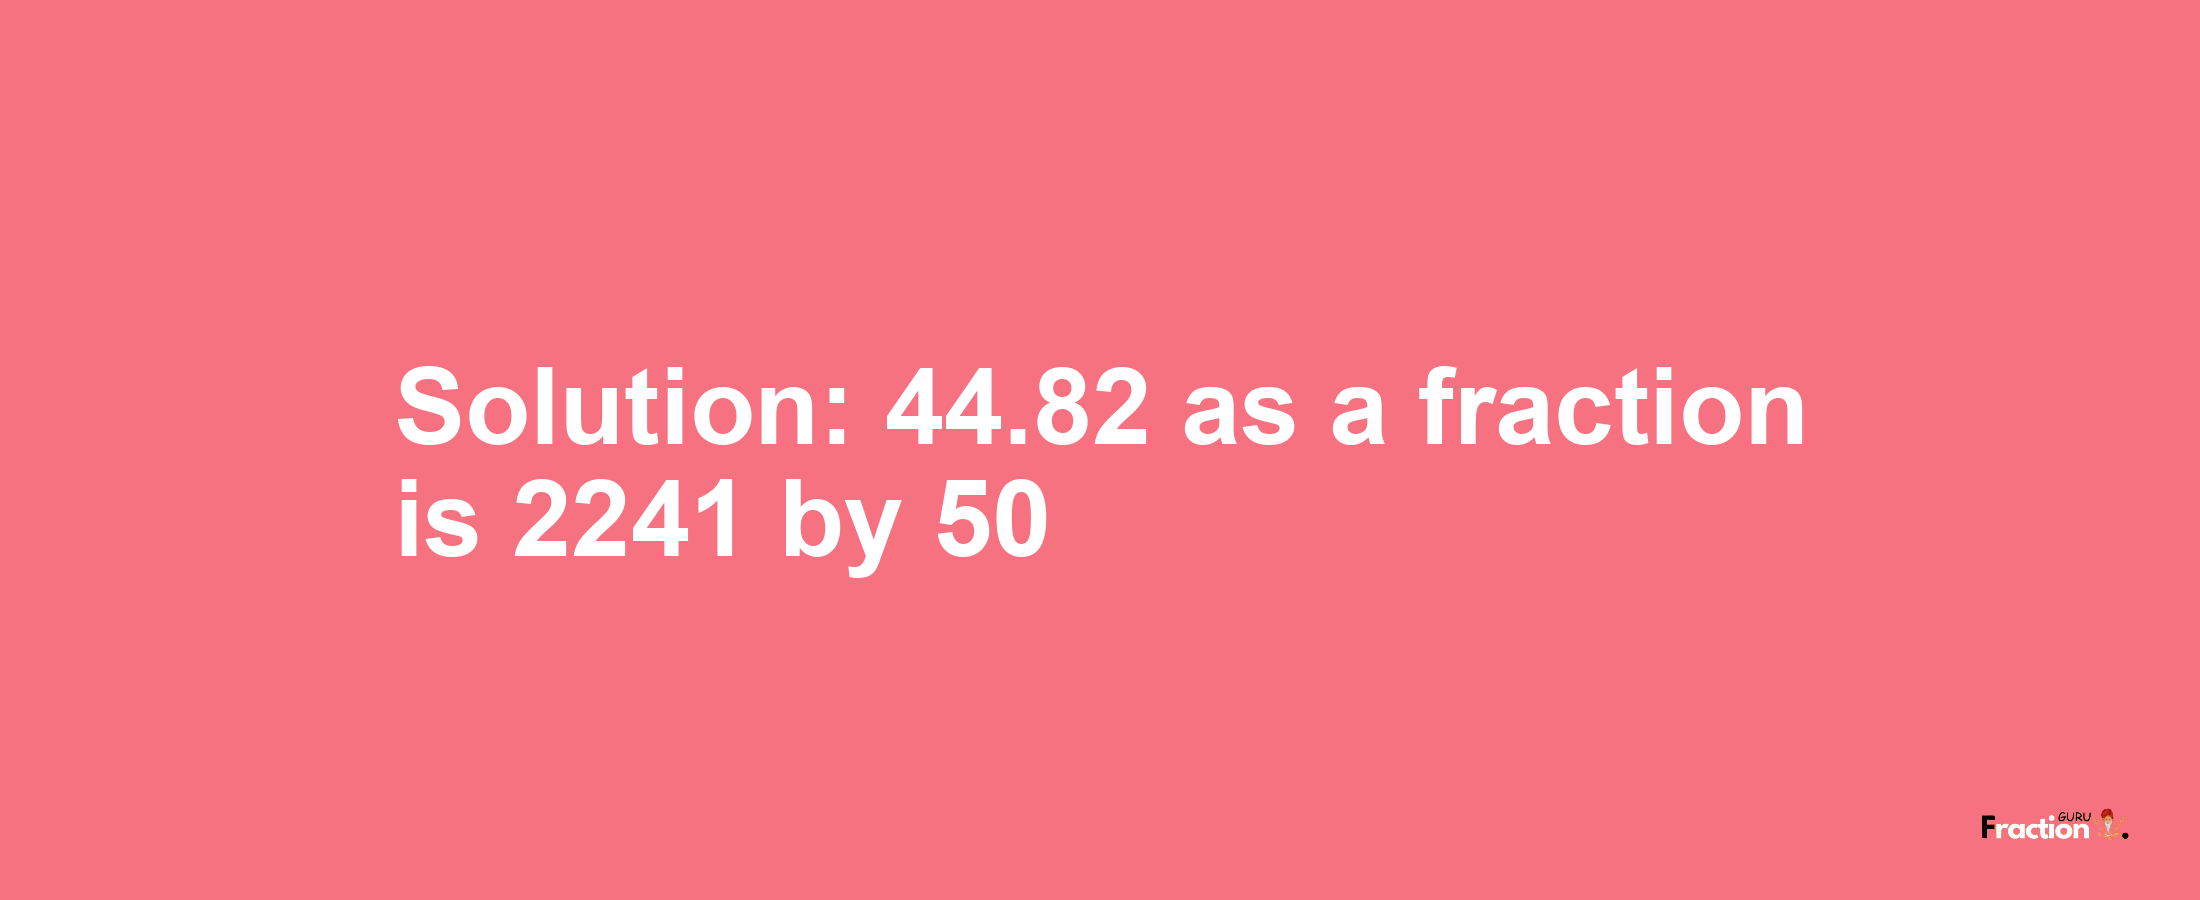 Solution:44.82 as a fraction is 2241/50